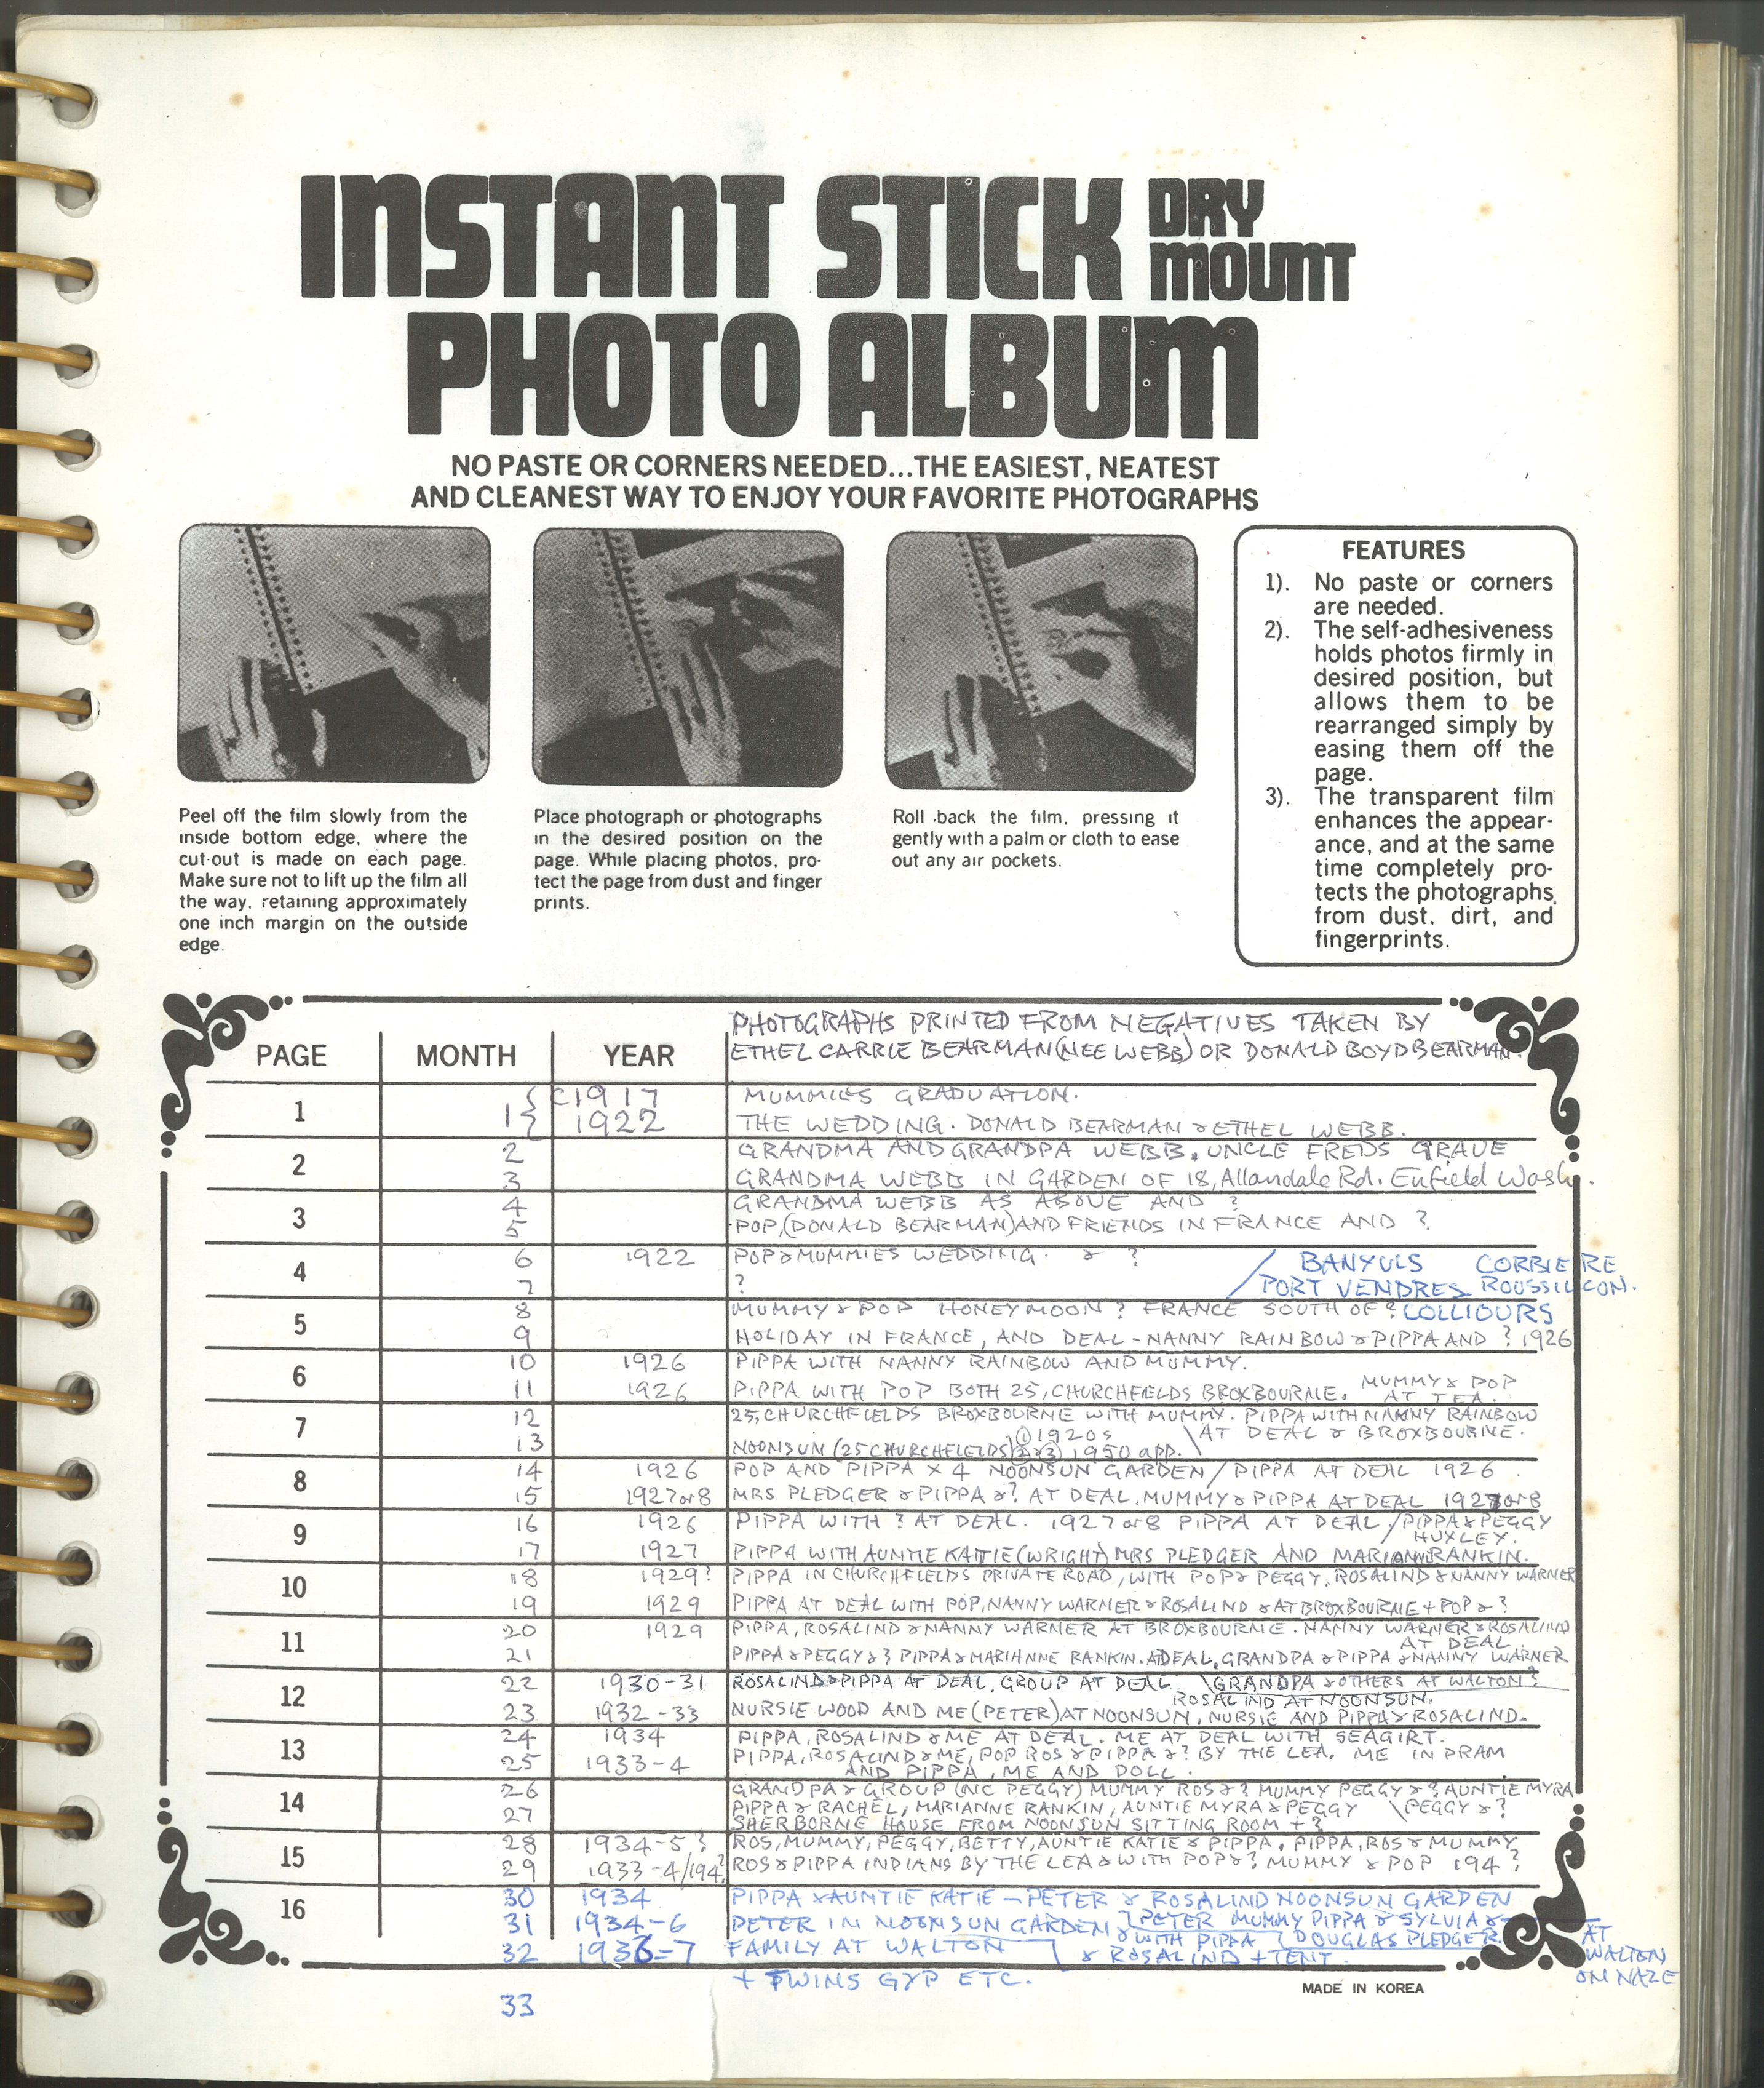 Index to Peter Bearman’s photo album from his parent’s negatives